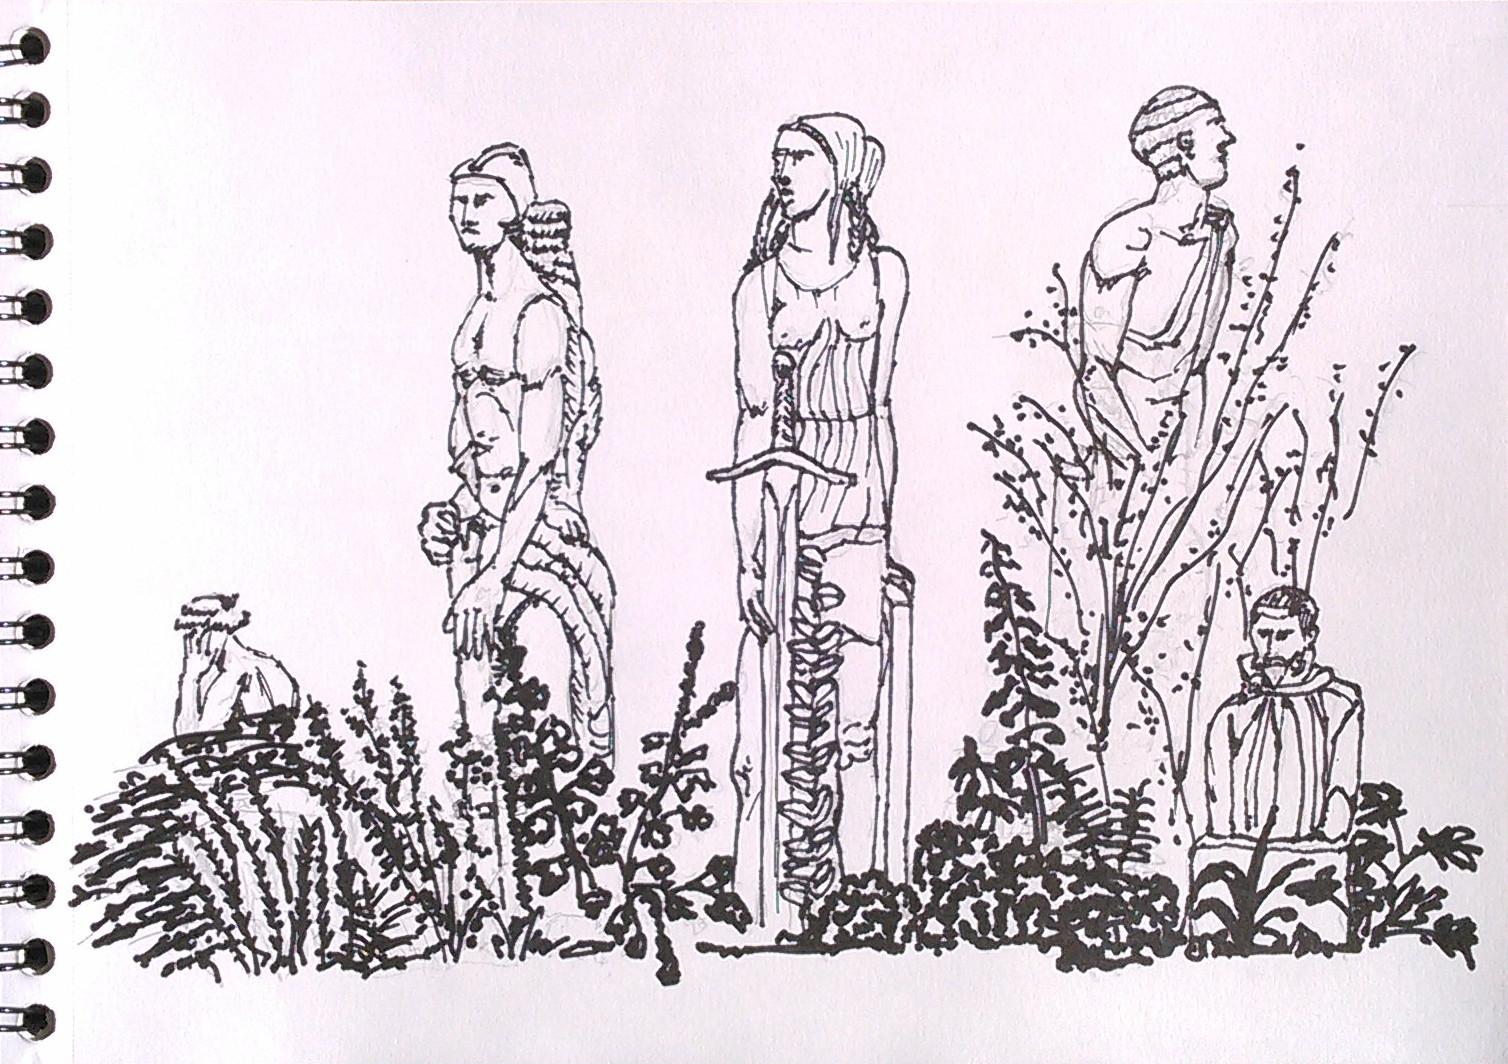 A composition of statues